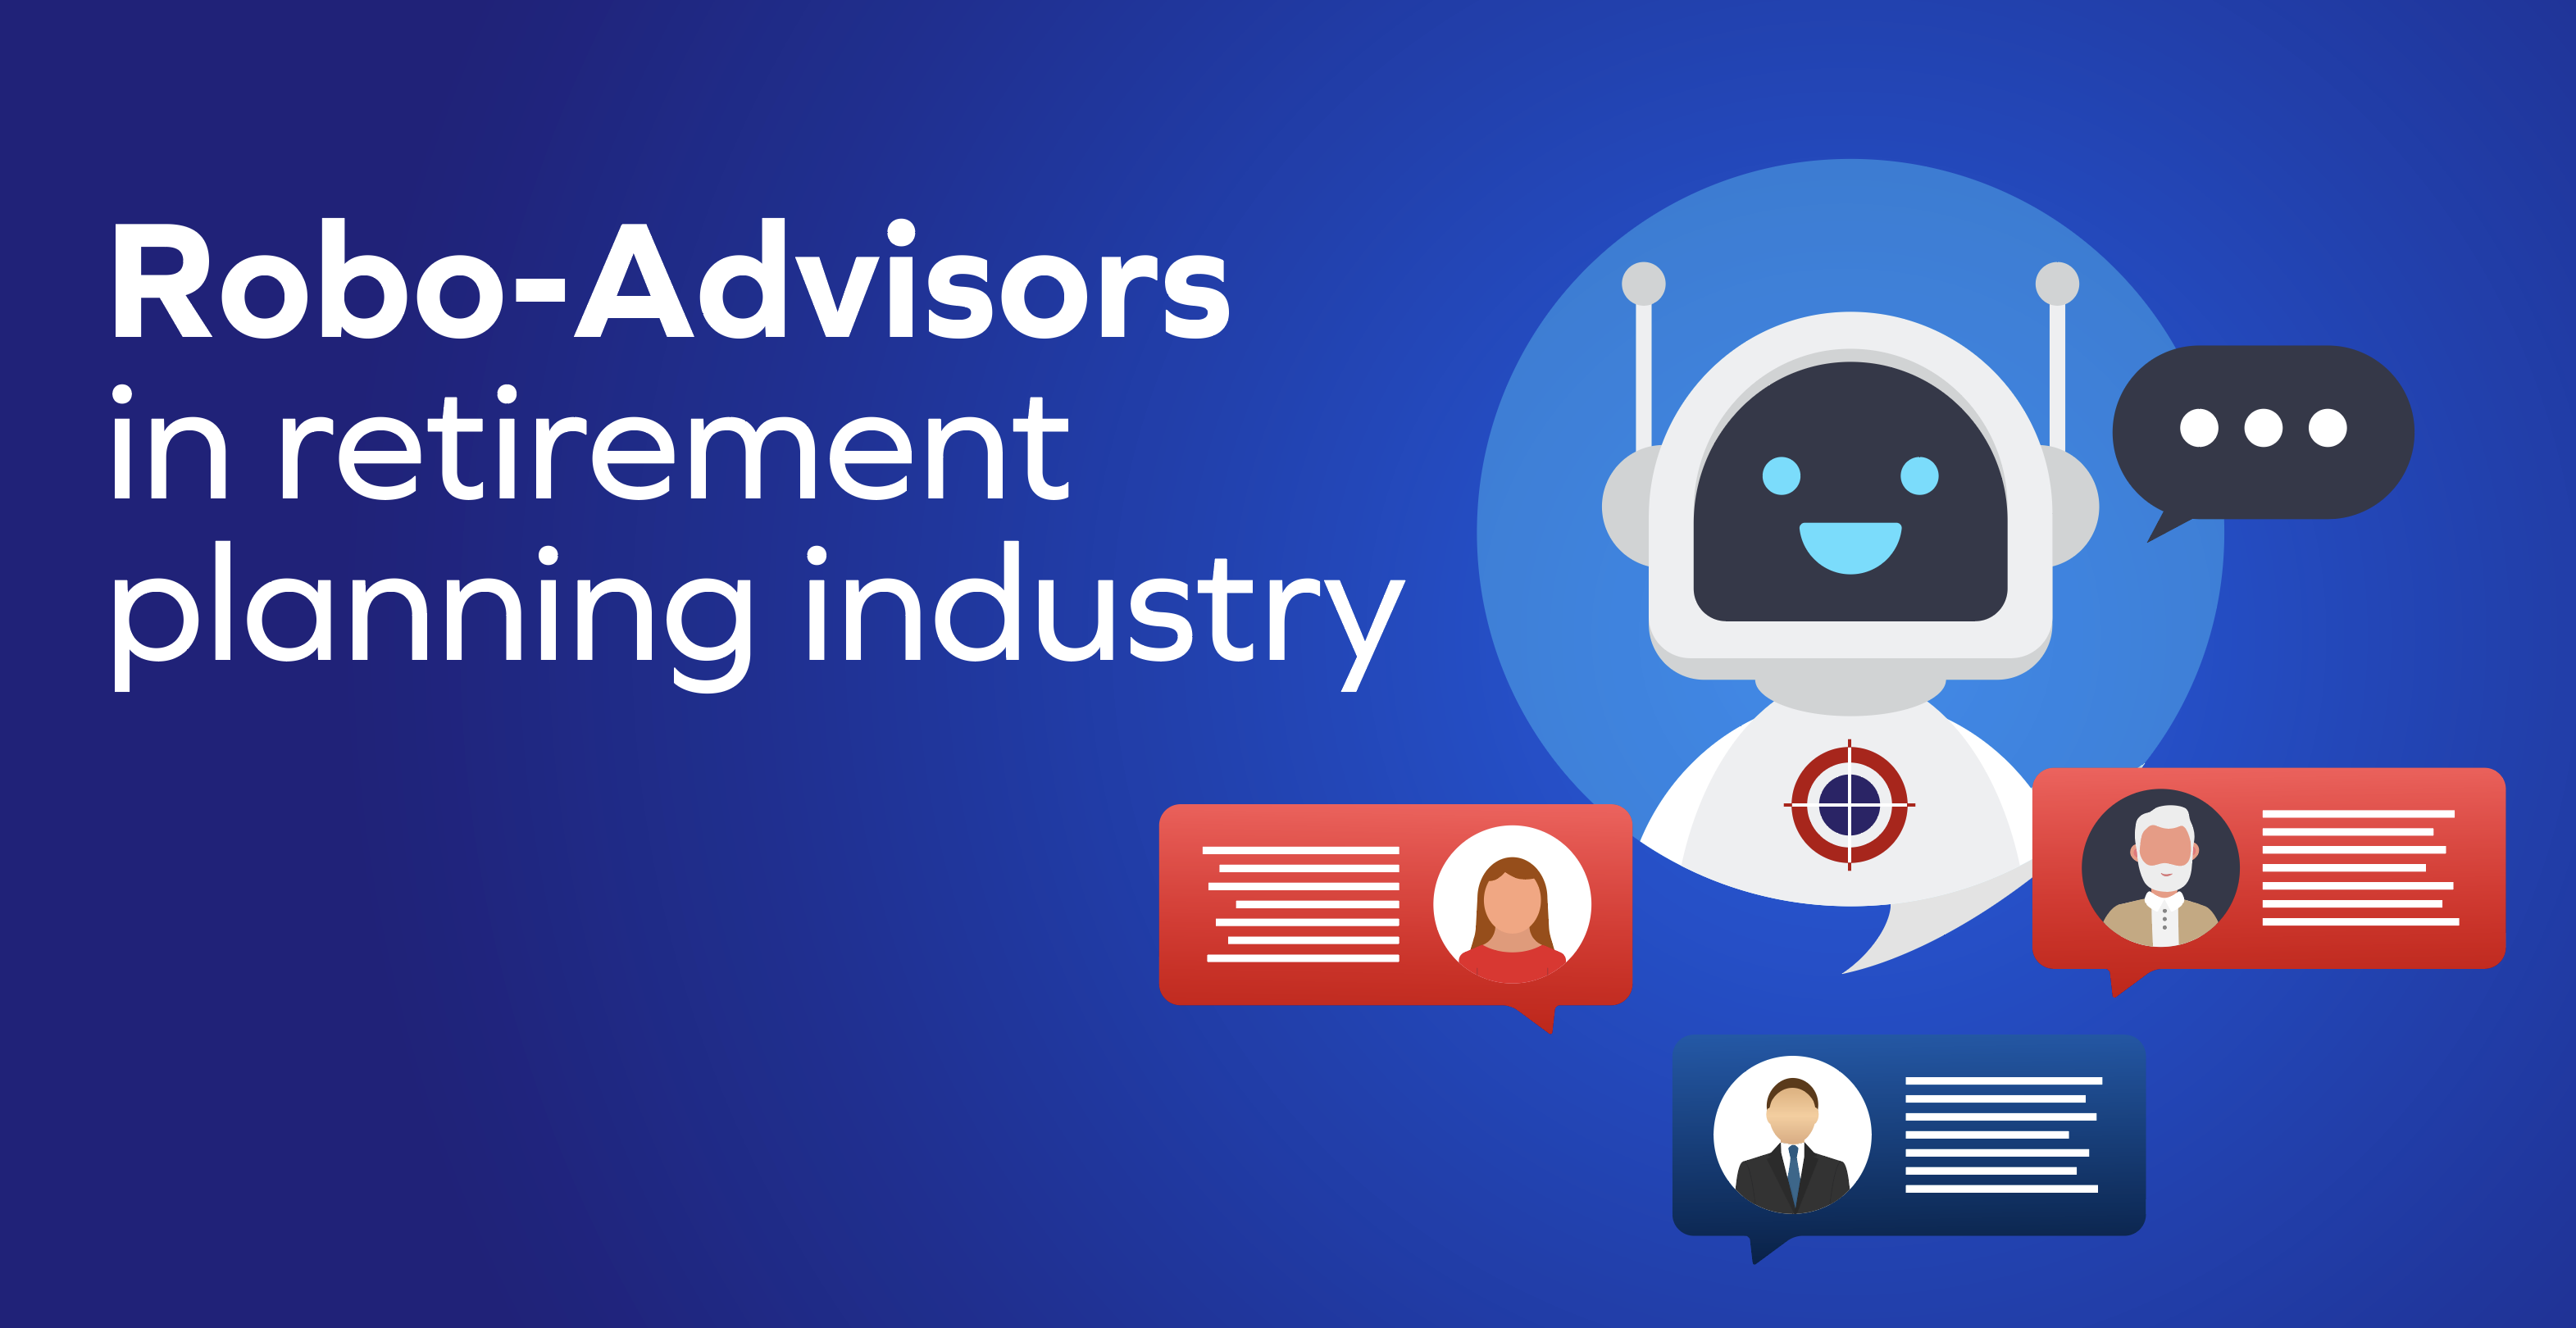 7 Ways in which Robo-Advisors can Transform your Retirement Planning Offerings